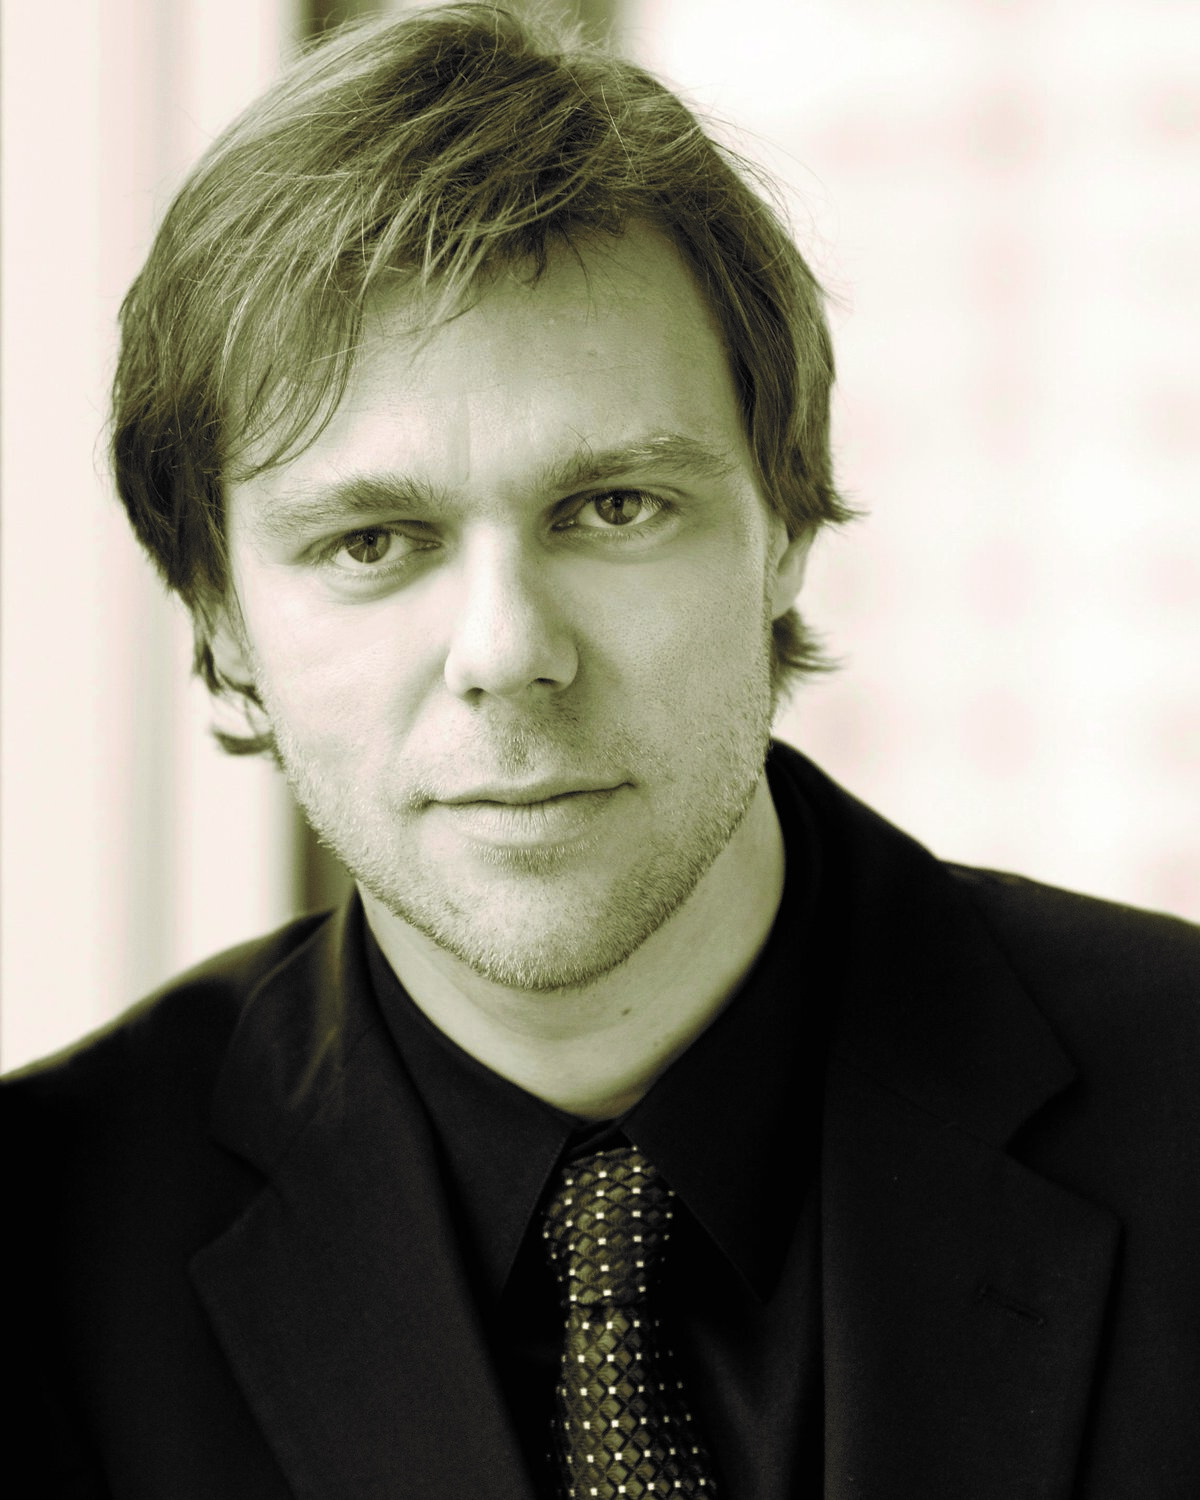 The popular pianist Andrius Zlabys returns to Arts in the Village on Saturday, September 23